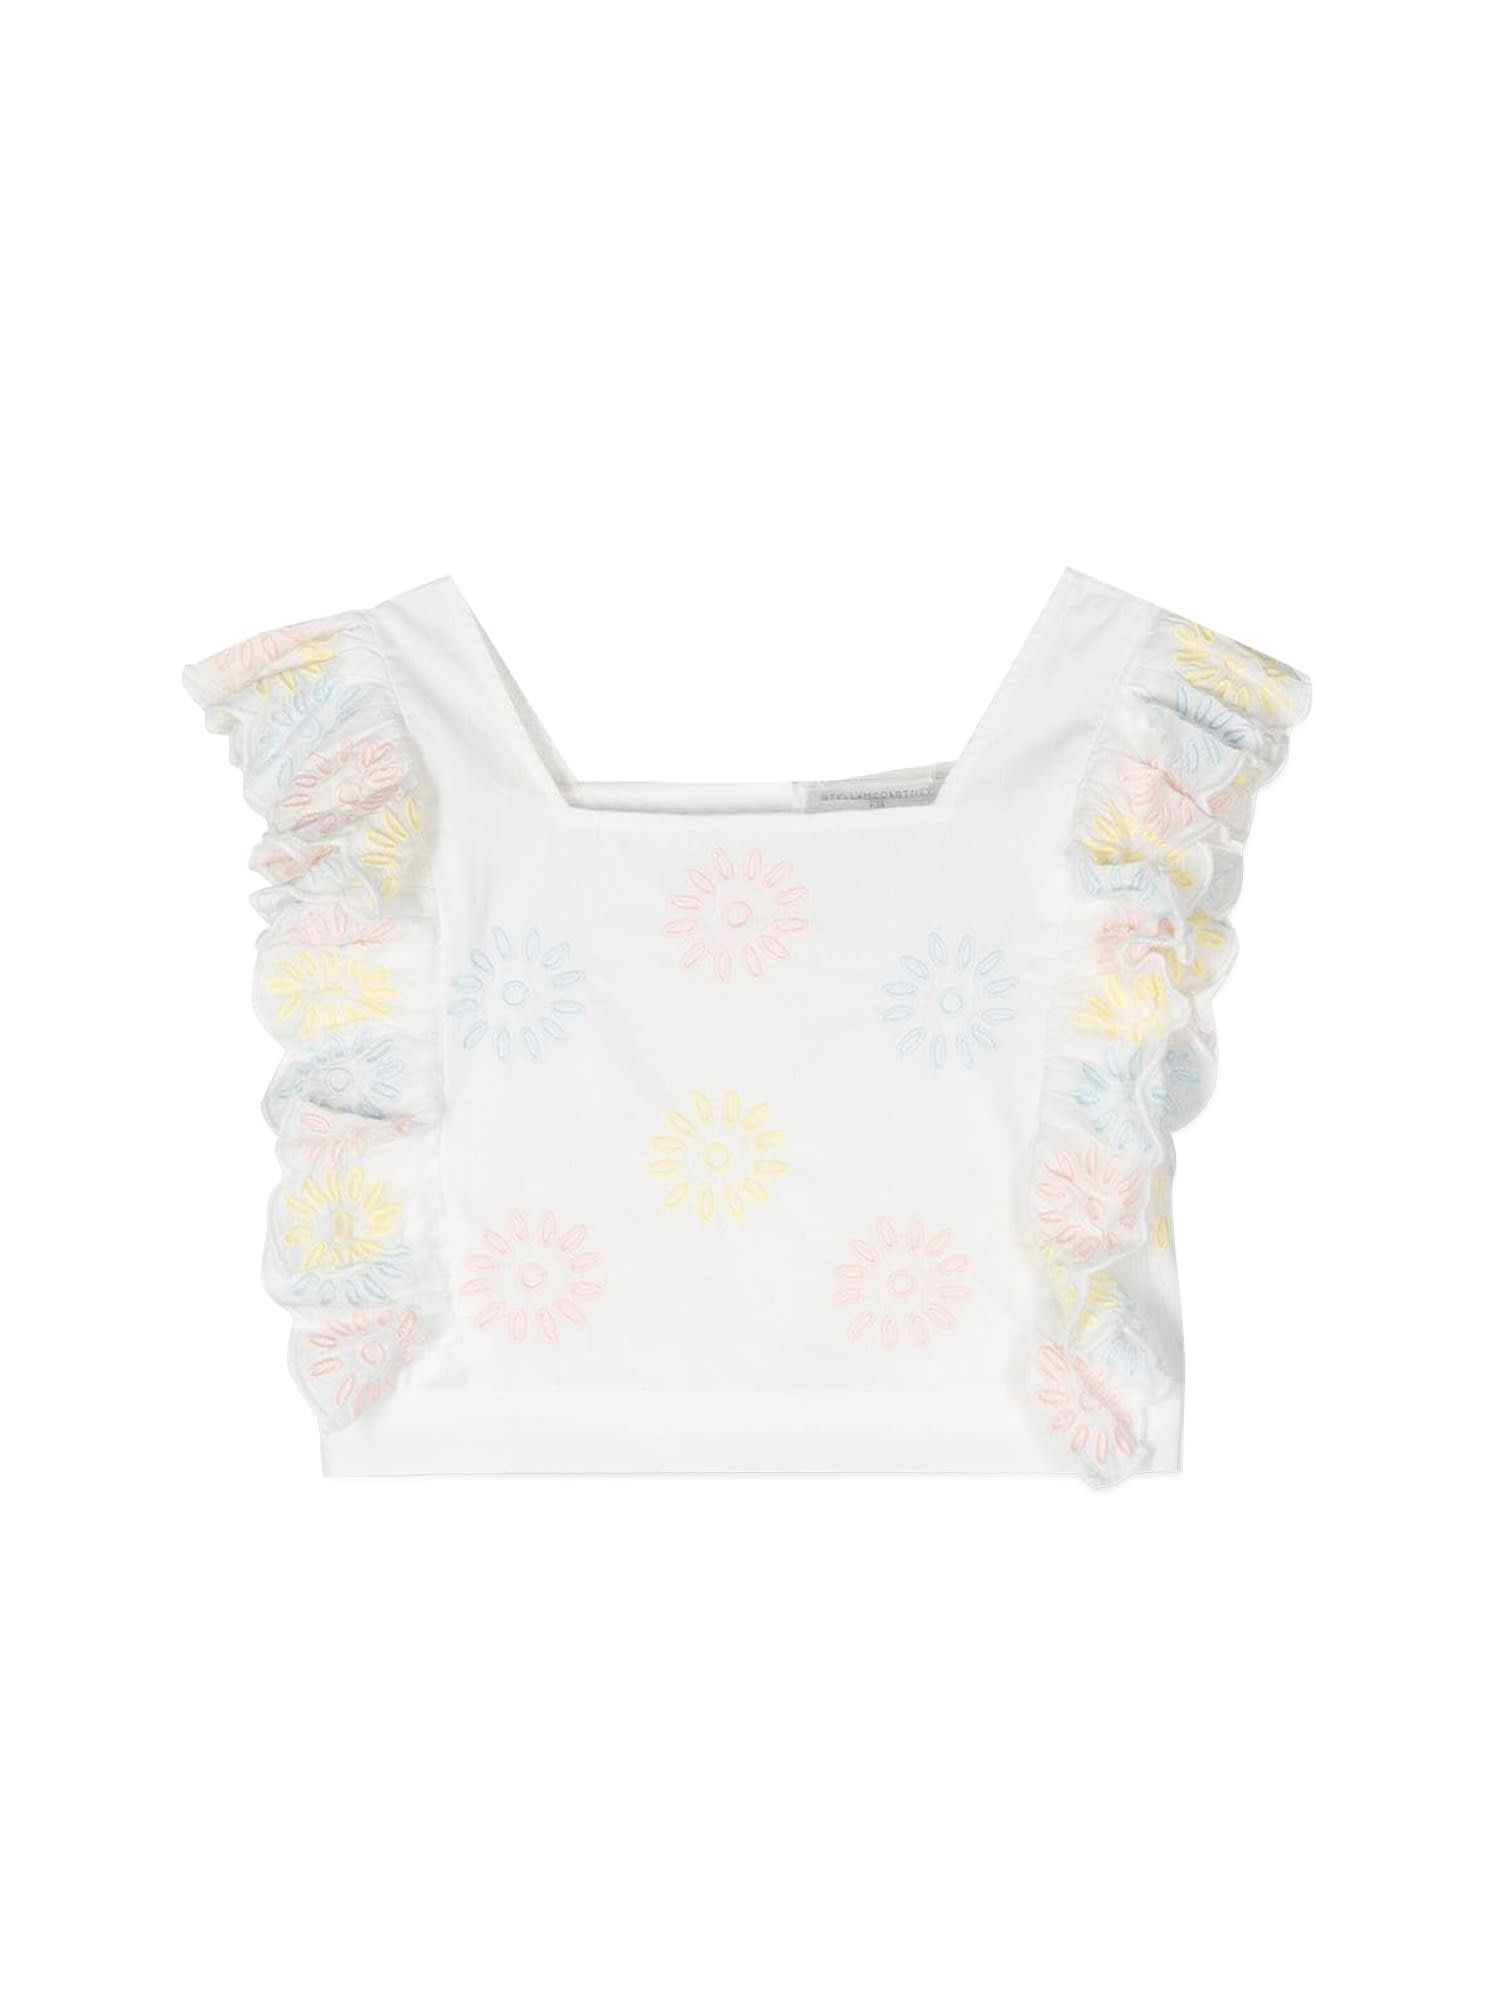 STELLA MCCARTNEY EMBROIDERED SM CROPPED TOP